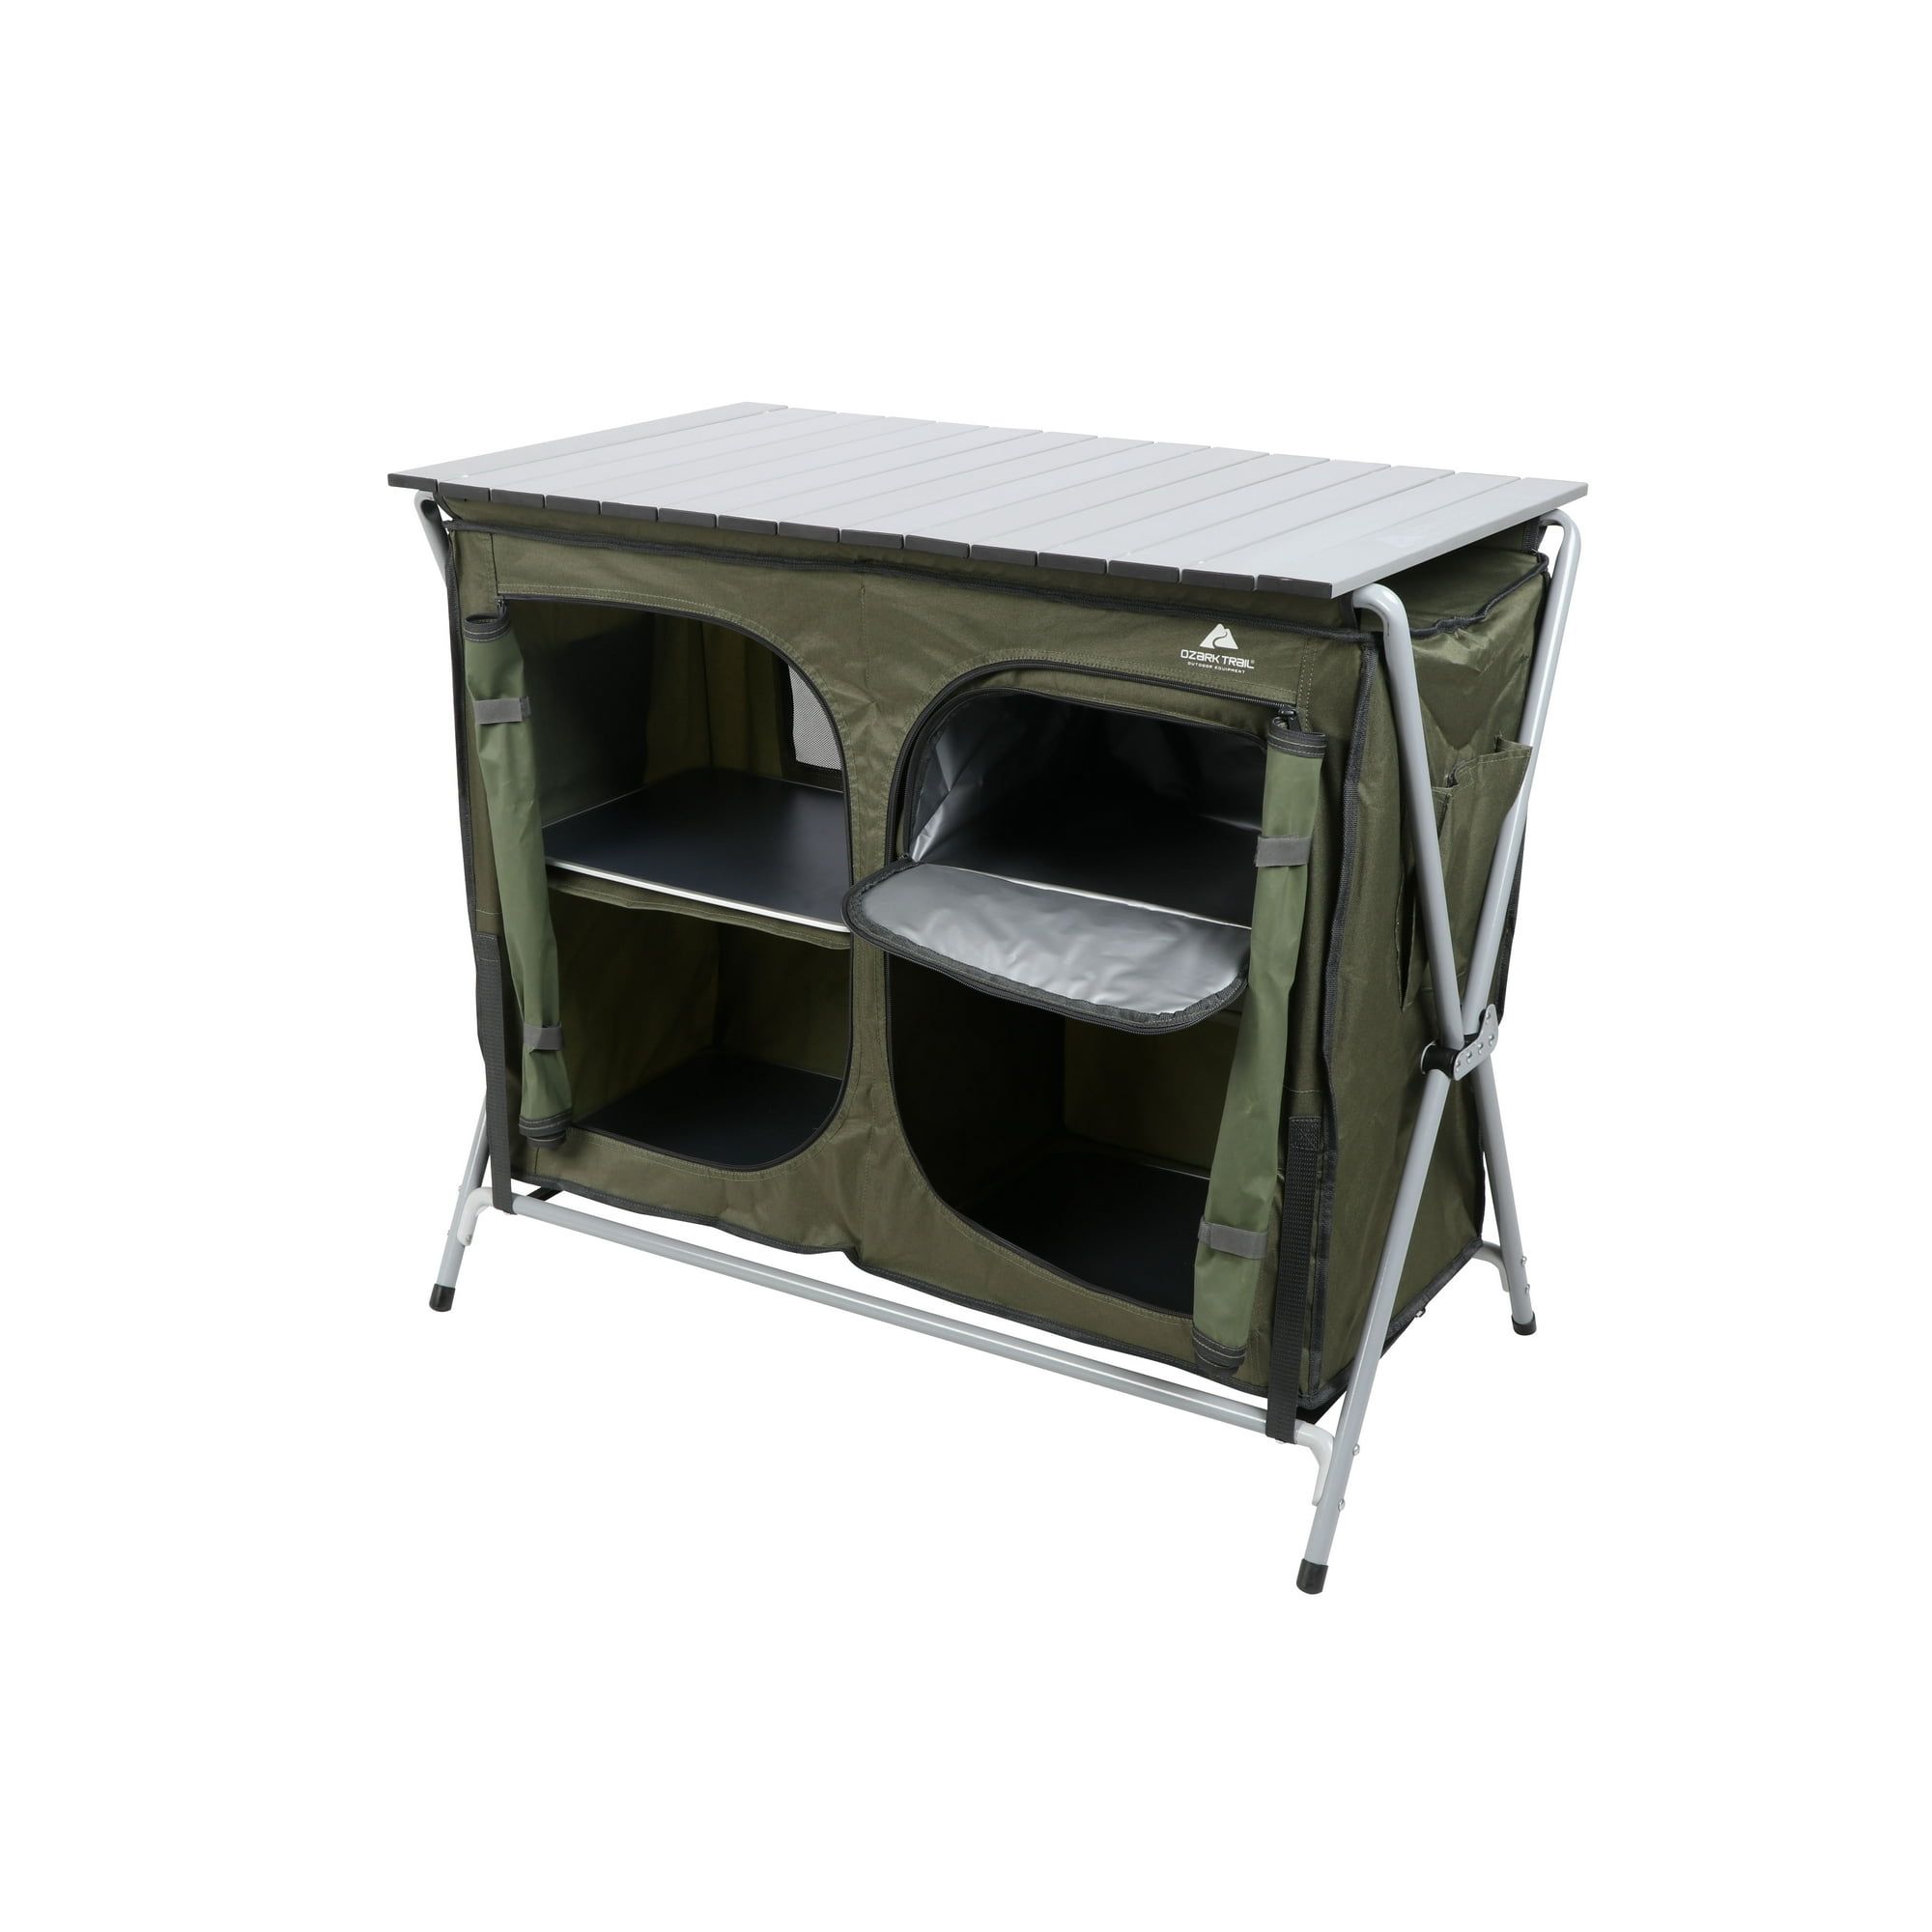 Ozark Trail Camping Table, Gray, 34.2"Wx19.6"Dx31.5"H